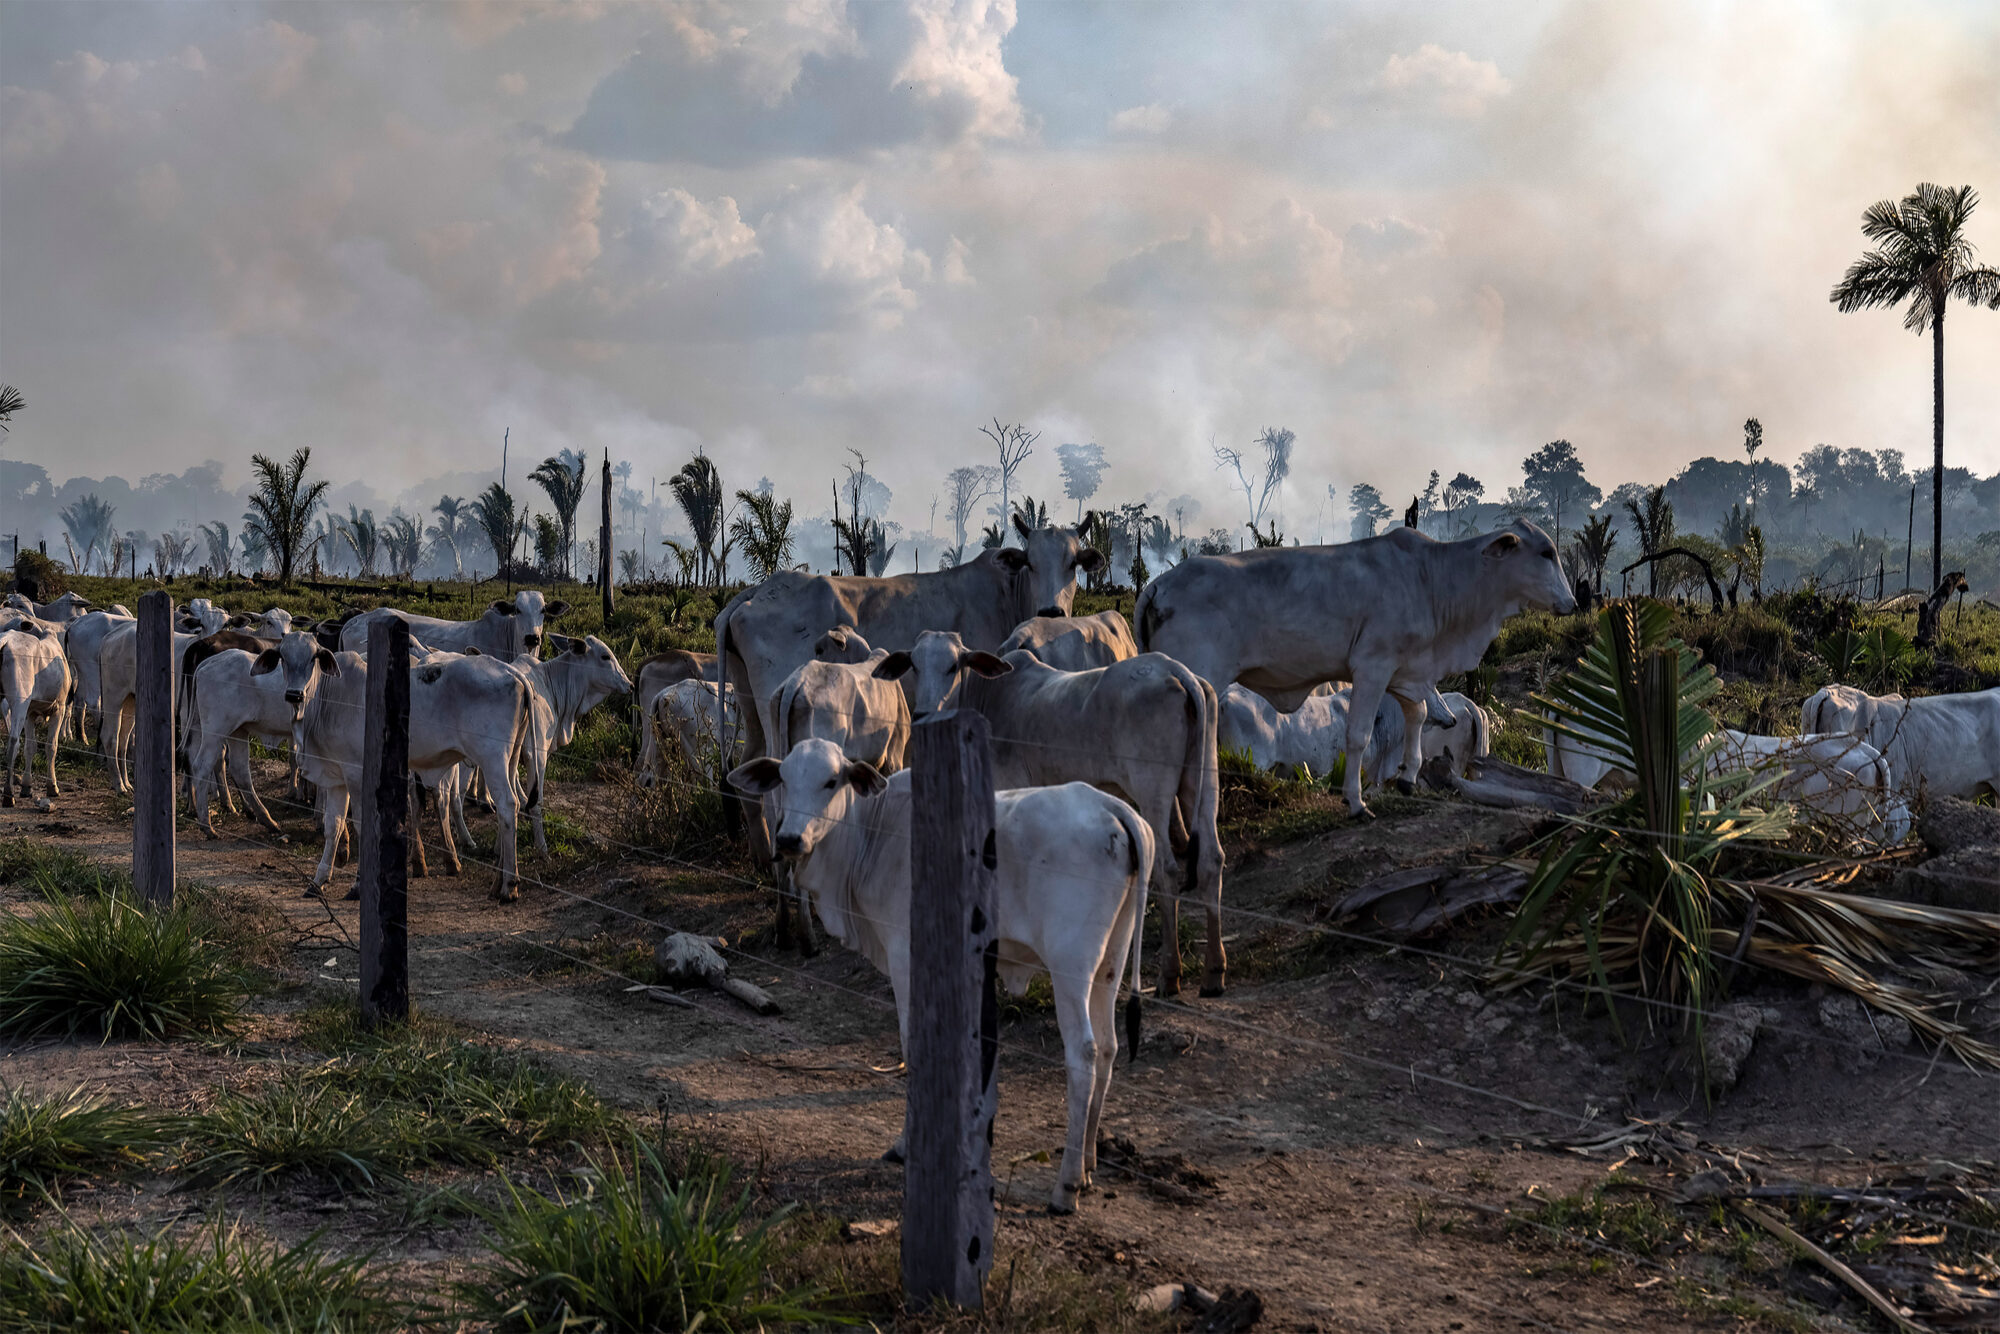 Cattle are raised next to a recently deforested and burnt area in Candeias do Jamari, Rondônia state, Brazil.